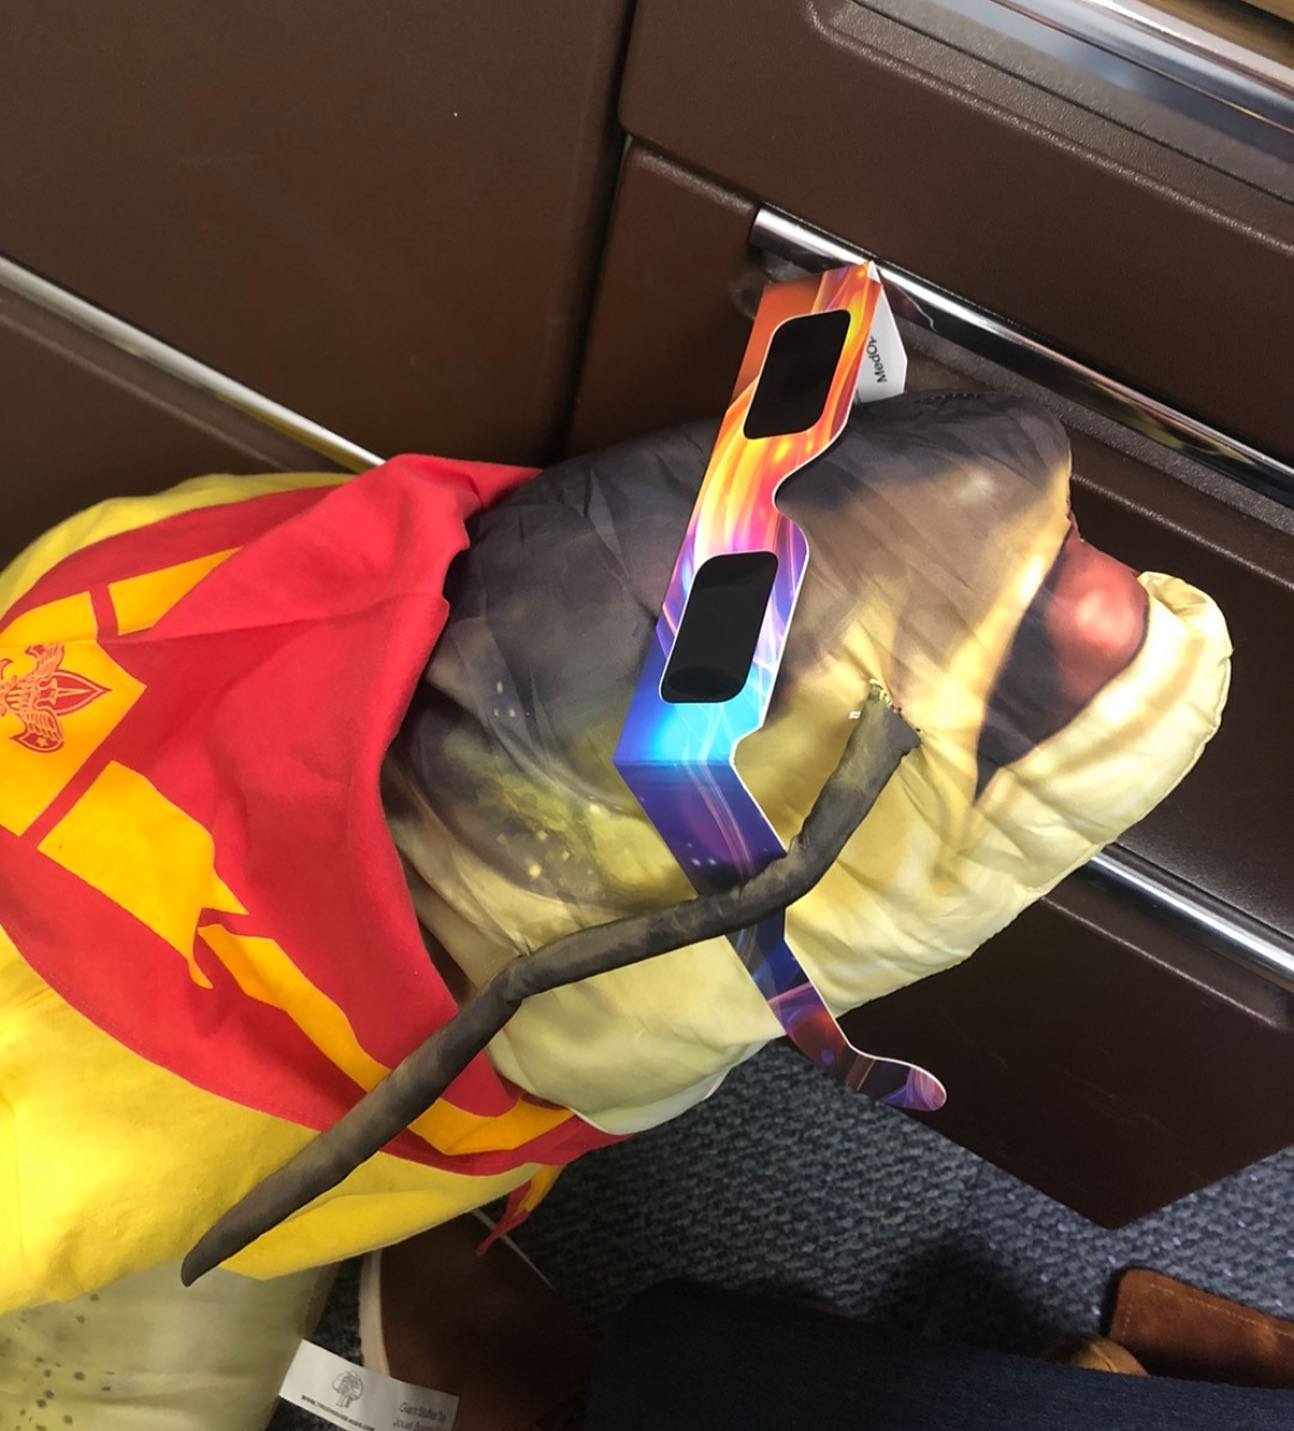 A quick safety moment from Franc&oacute;is the fish!

For anyone viewing the solar eclipse today, we want to make sure you are able to see the splendor that is Ma-Ka-Ja-Wan this summer, so PLEASE only look at the sun through proper viewing glasses.

